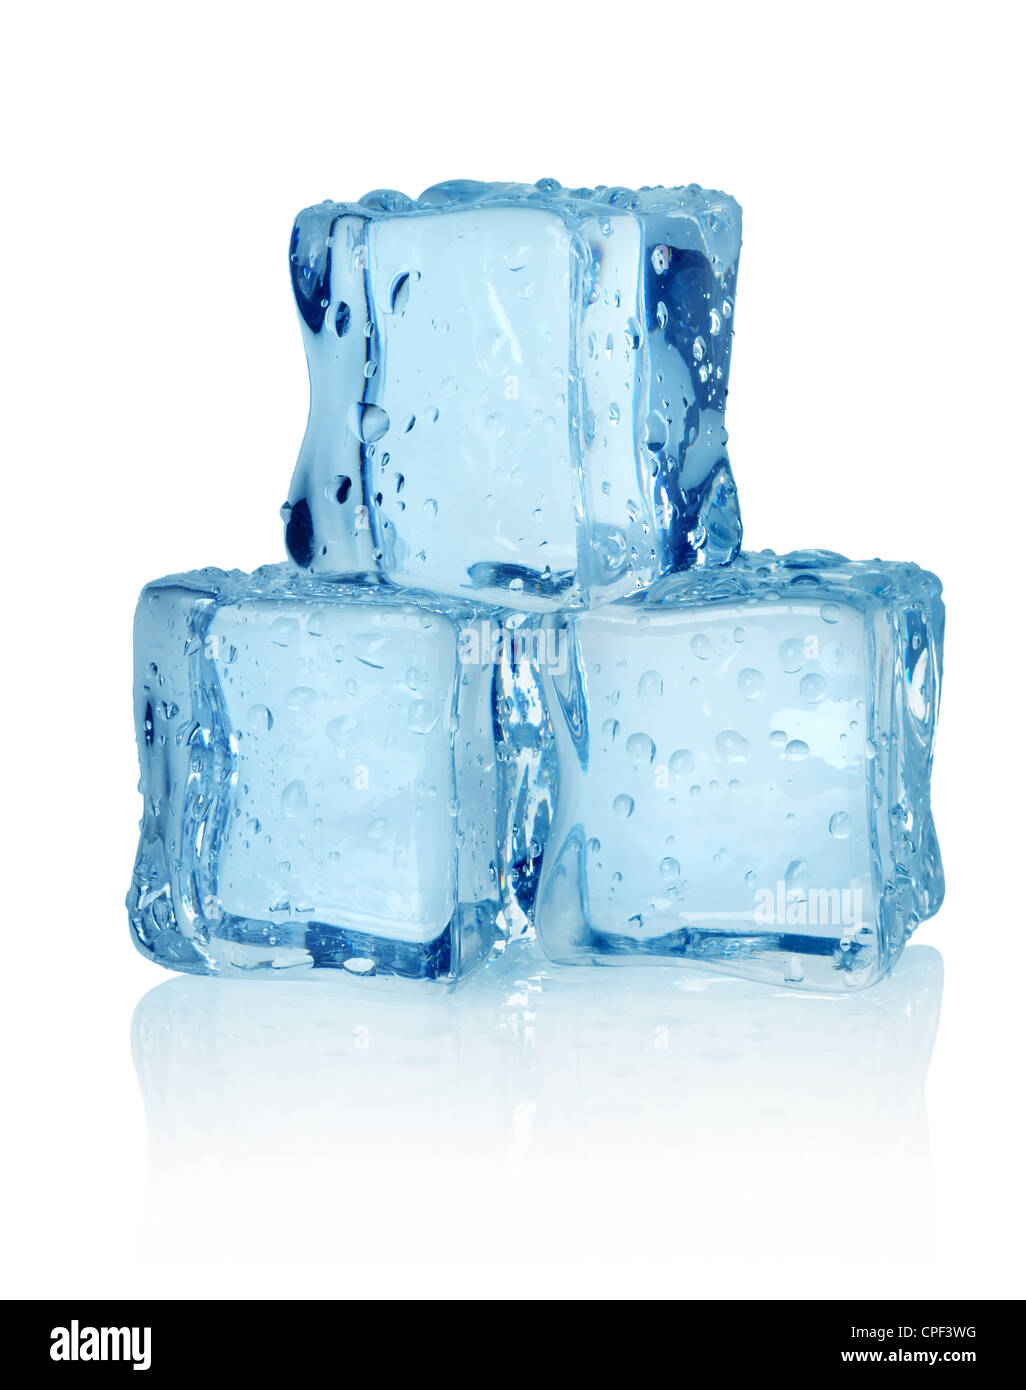 Three ice cubes isolated on a white background Stock Photo